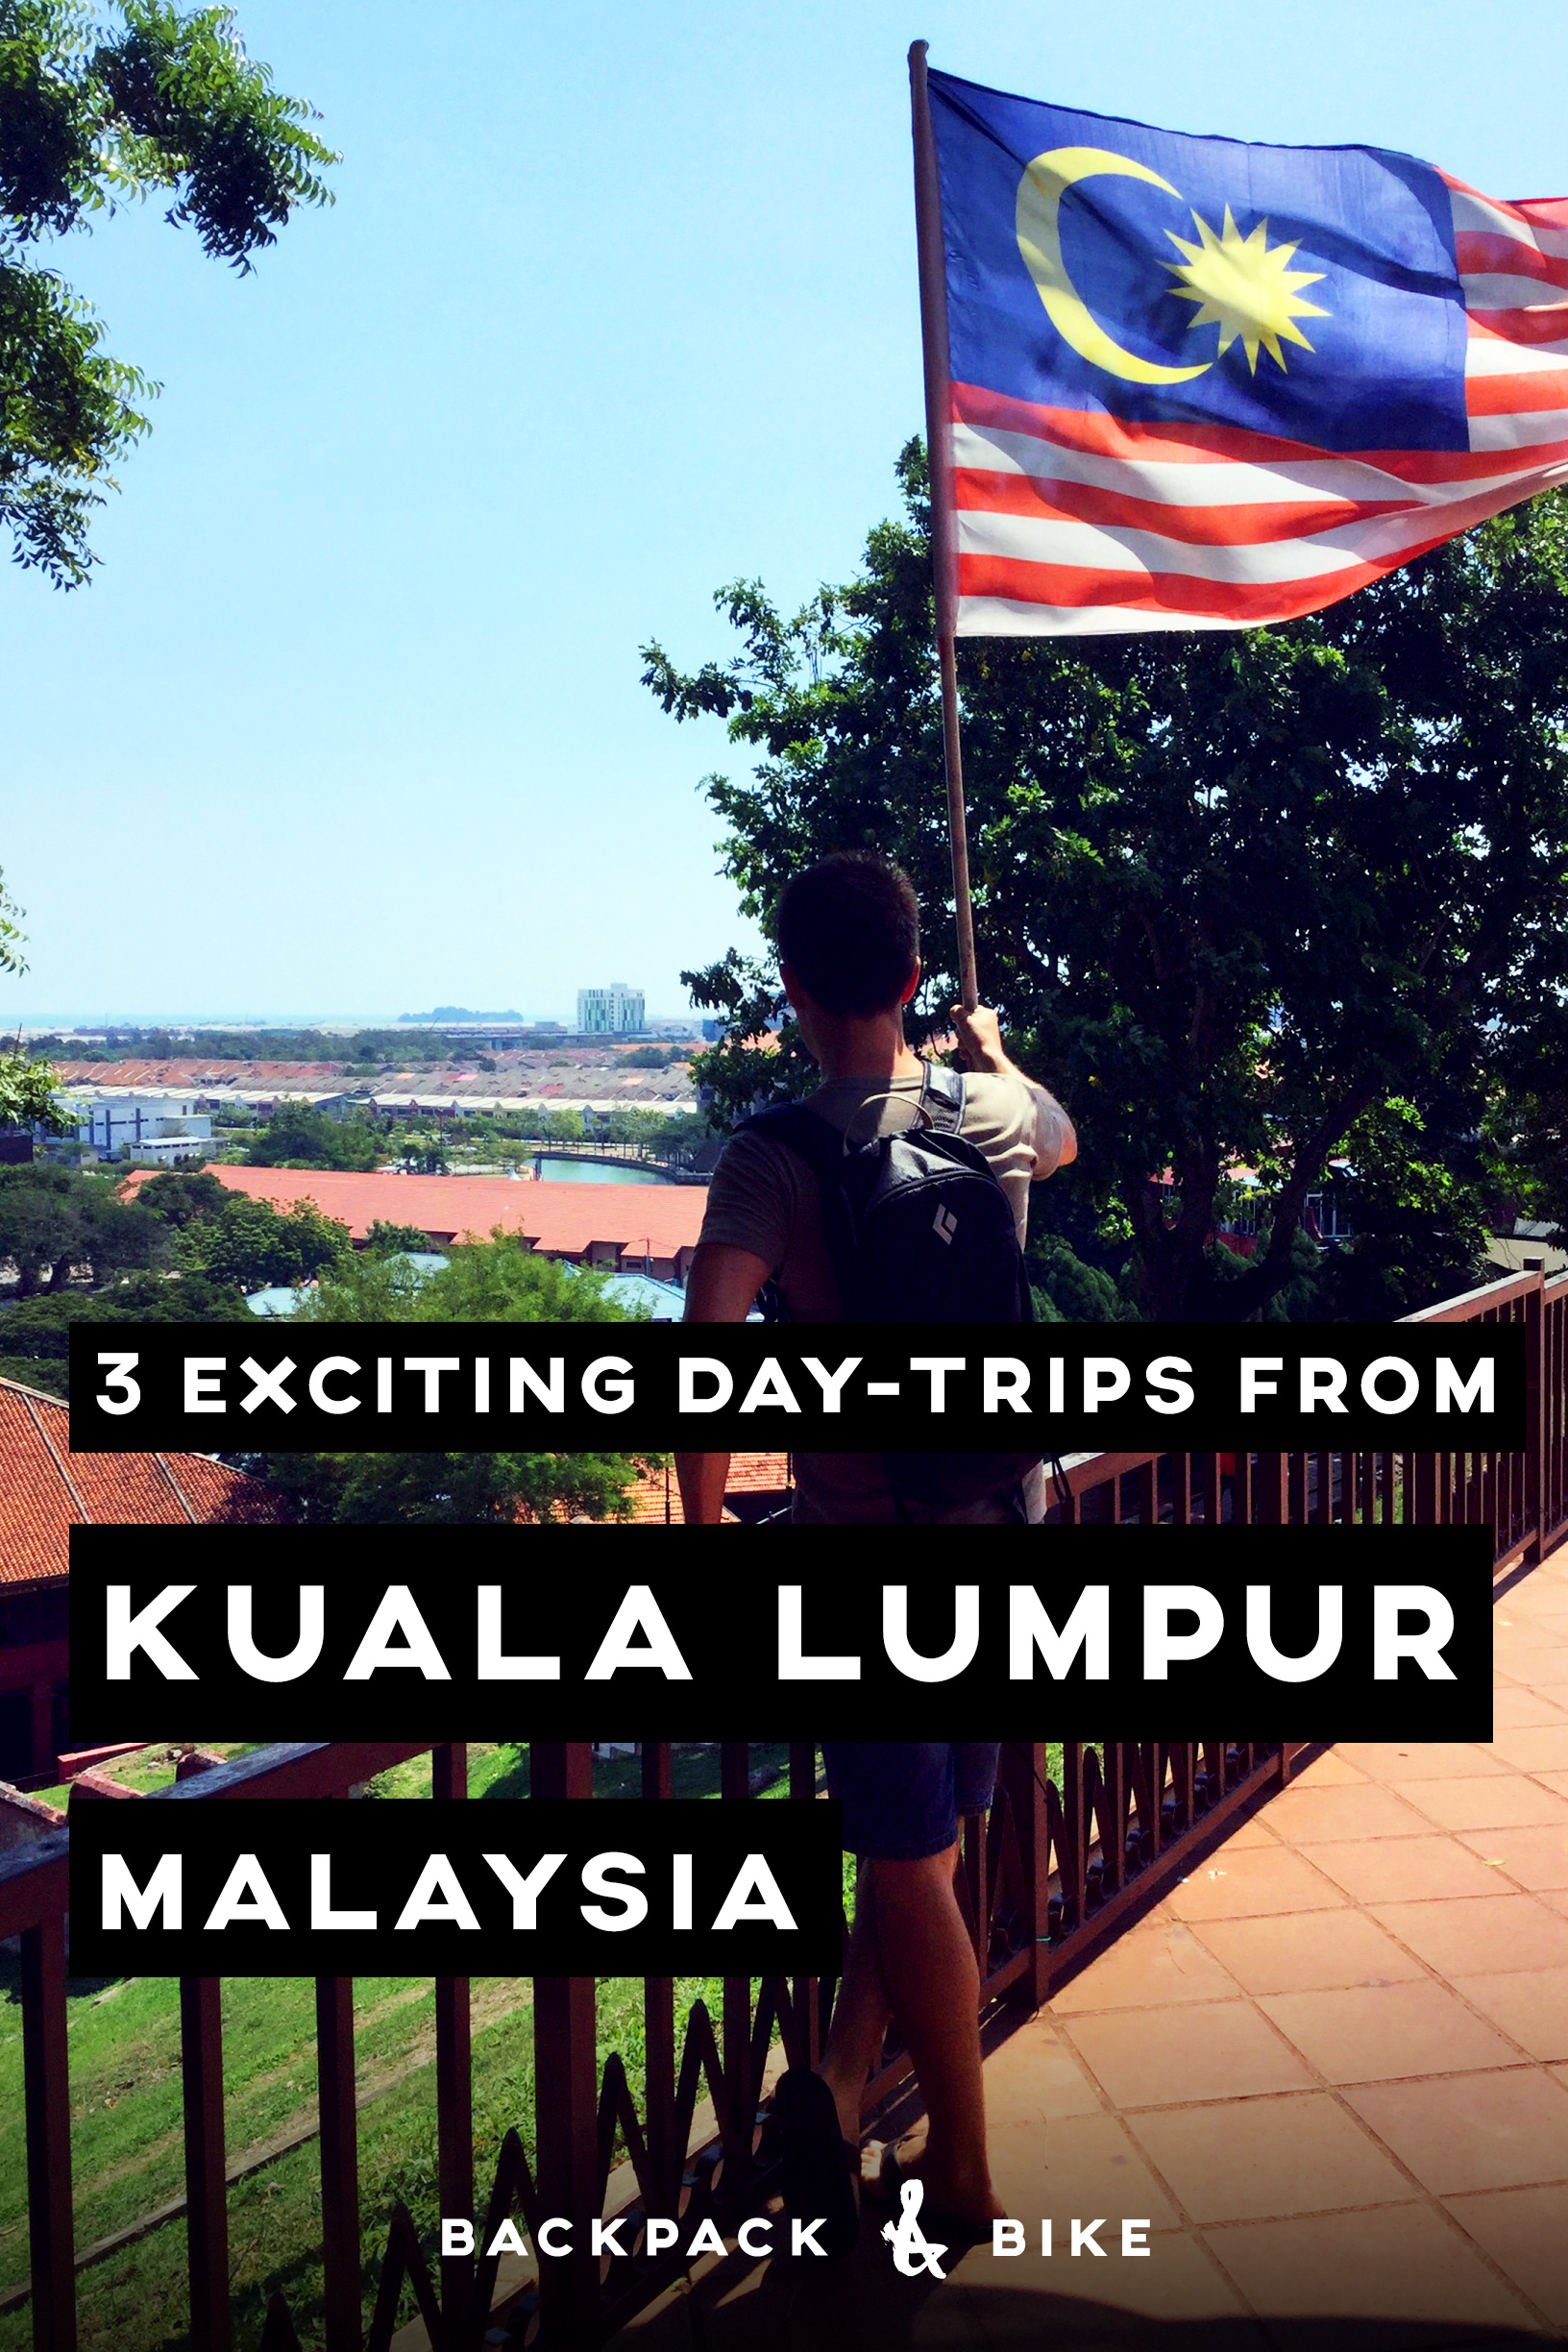 Though Kuala Lumpur is an exciting place, make sure not to miss it's wonderful neighbours. Here are 3 day trips you can take from KL to get away for a day.